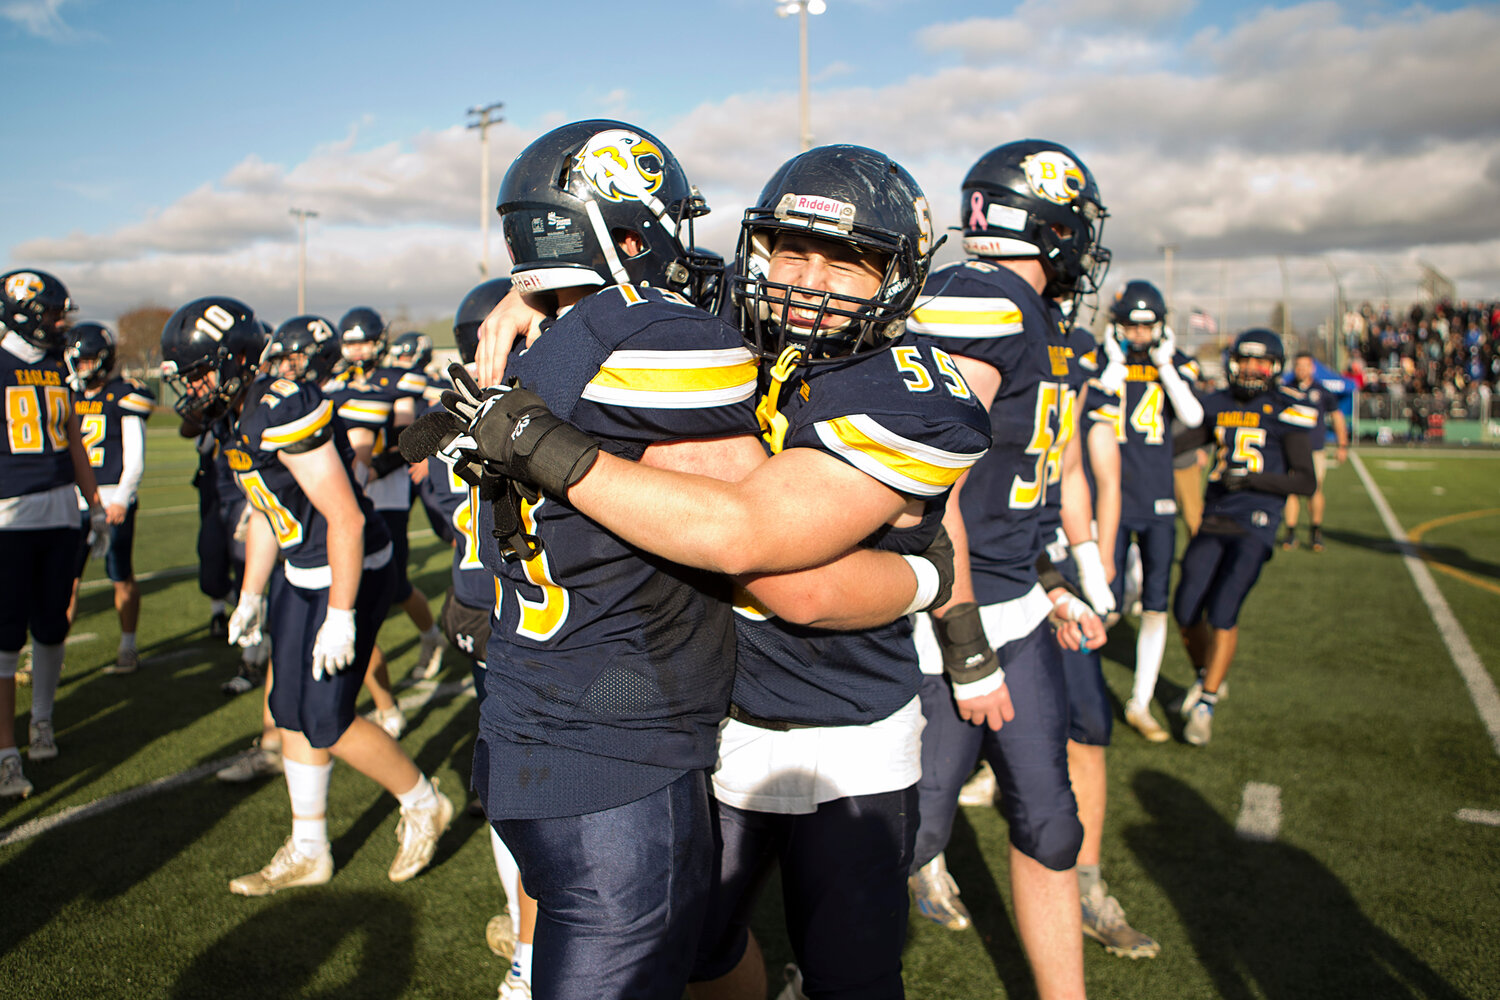 Joe Gonsalves (left) and Marco Lopergolo share a hug after the game.